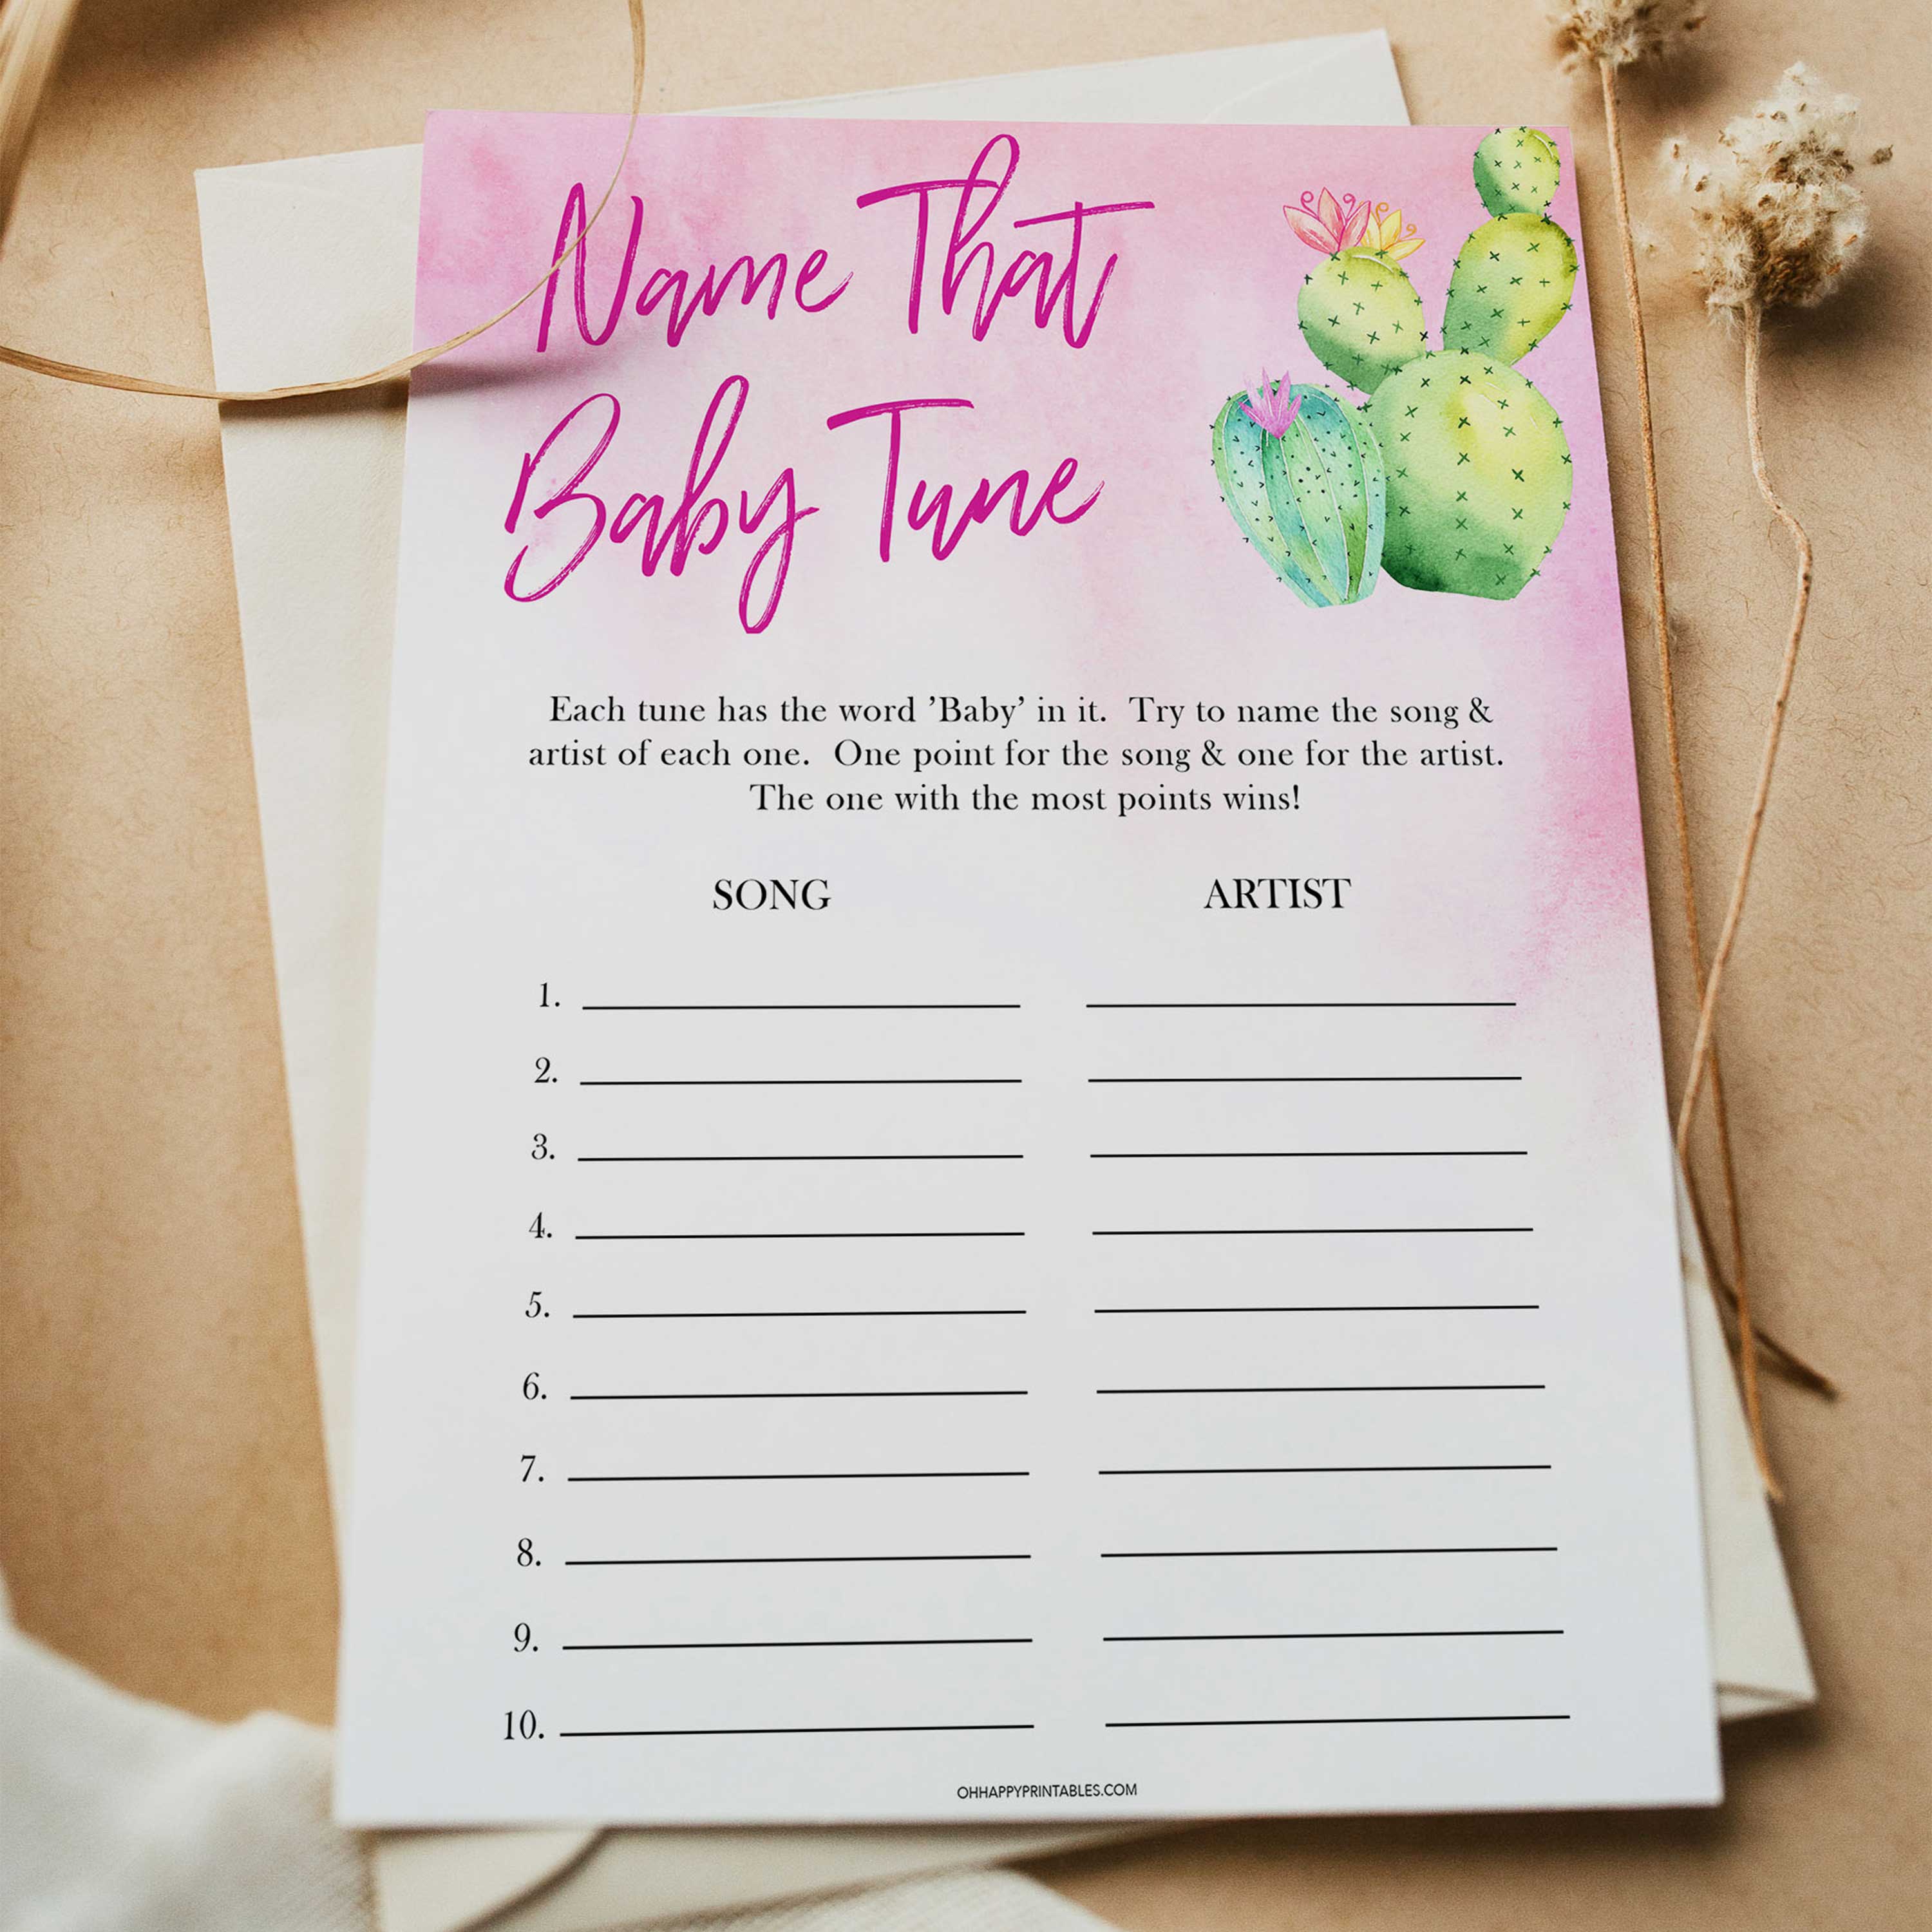 Cactus baby shower games, cactus name that baby tune baby game, printable baby games, Mexican baby shower, Mexican baby games, fiesta baby games, popular baby games, printable baby games